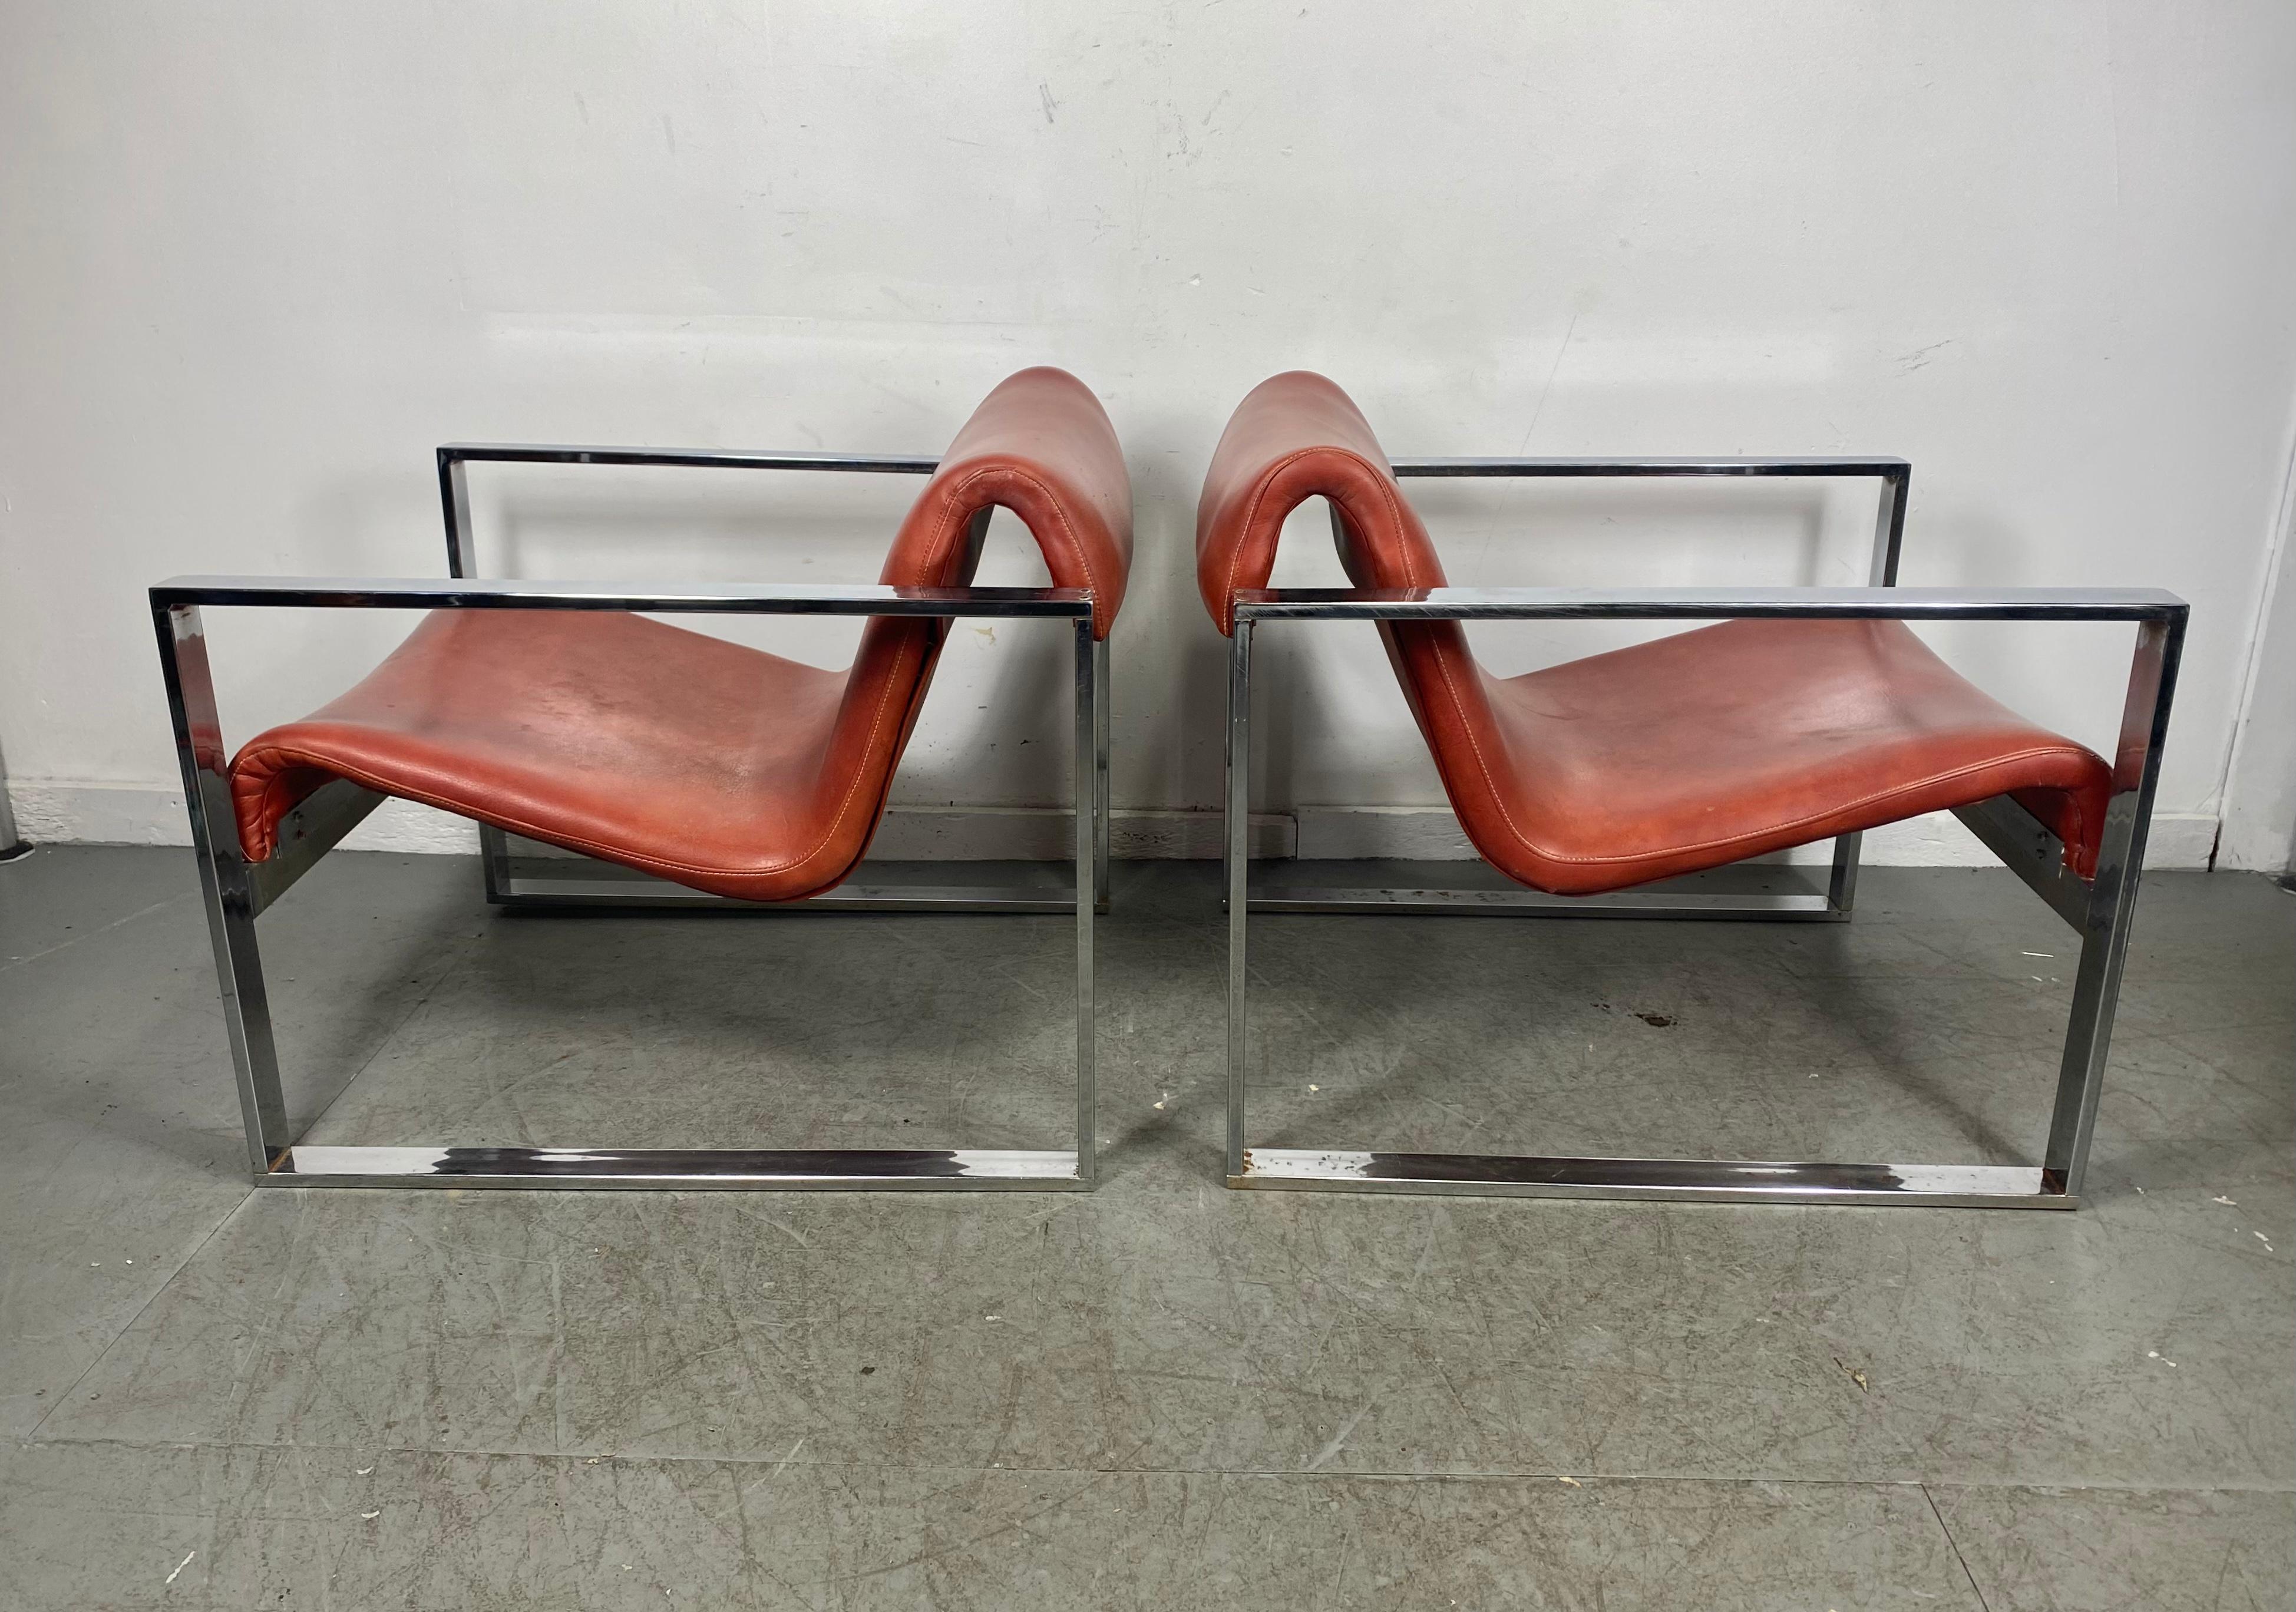 Dramatic pair stylized chrome frame lounge chairs, after Milo Baughman. Thayer Coggin. Stunning color. Great original condition. Extremely comfortable. Hand delivery avail to New York City or anywhere en route from Buffalo NY.